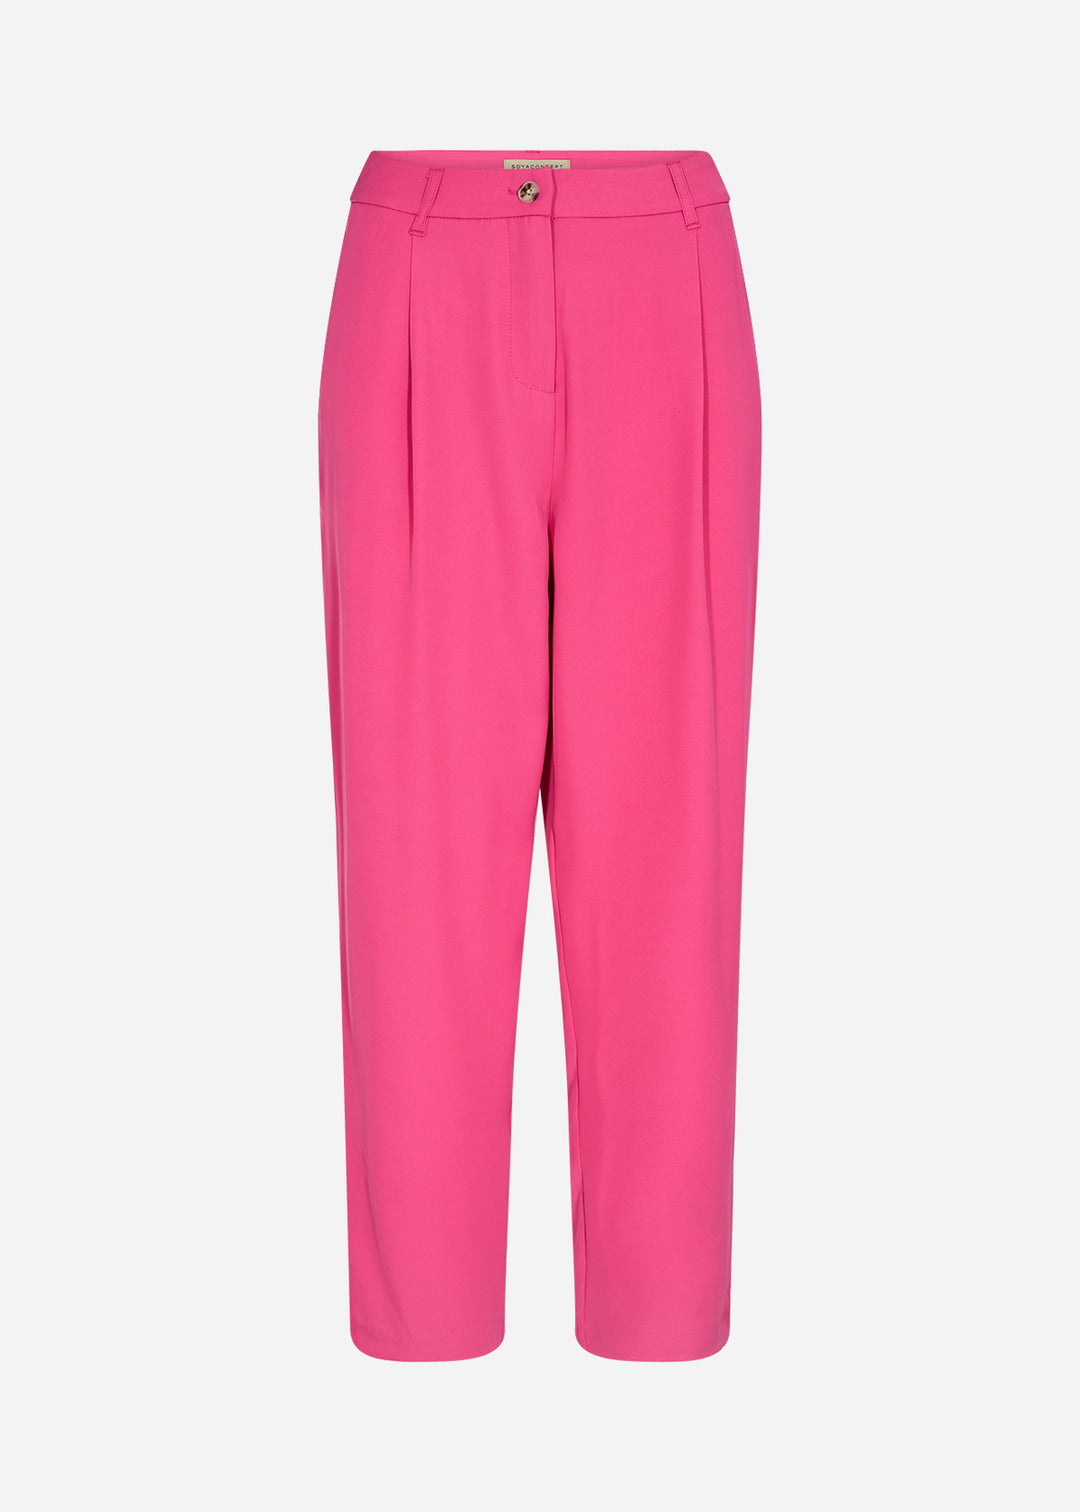 Soya Concept Gabi 12 Pink High Waisted Trouser Front View | Dotique